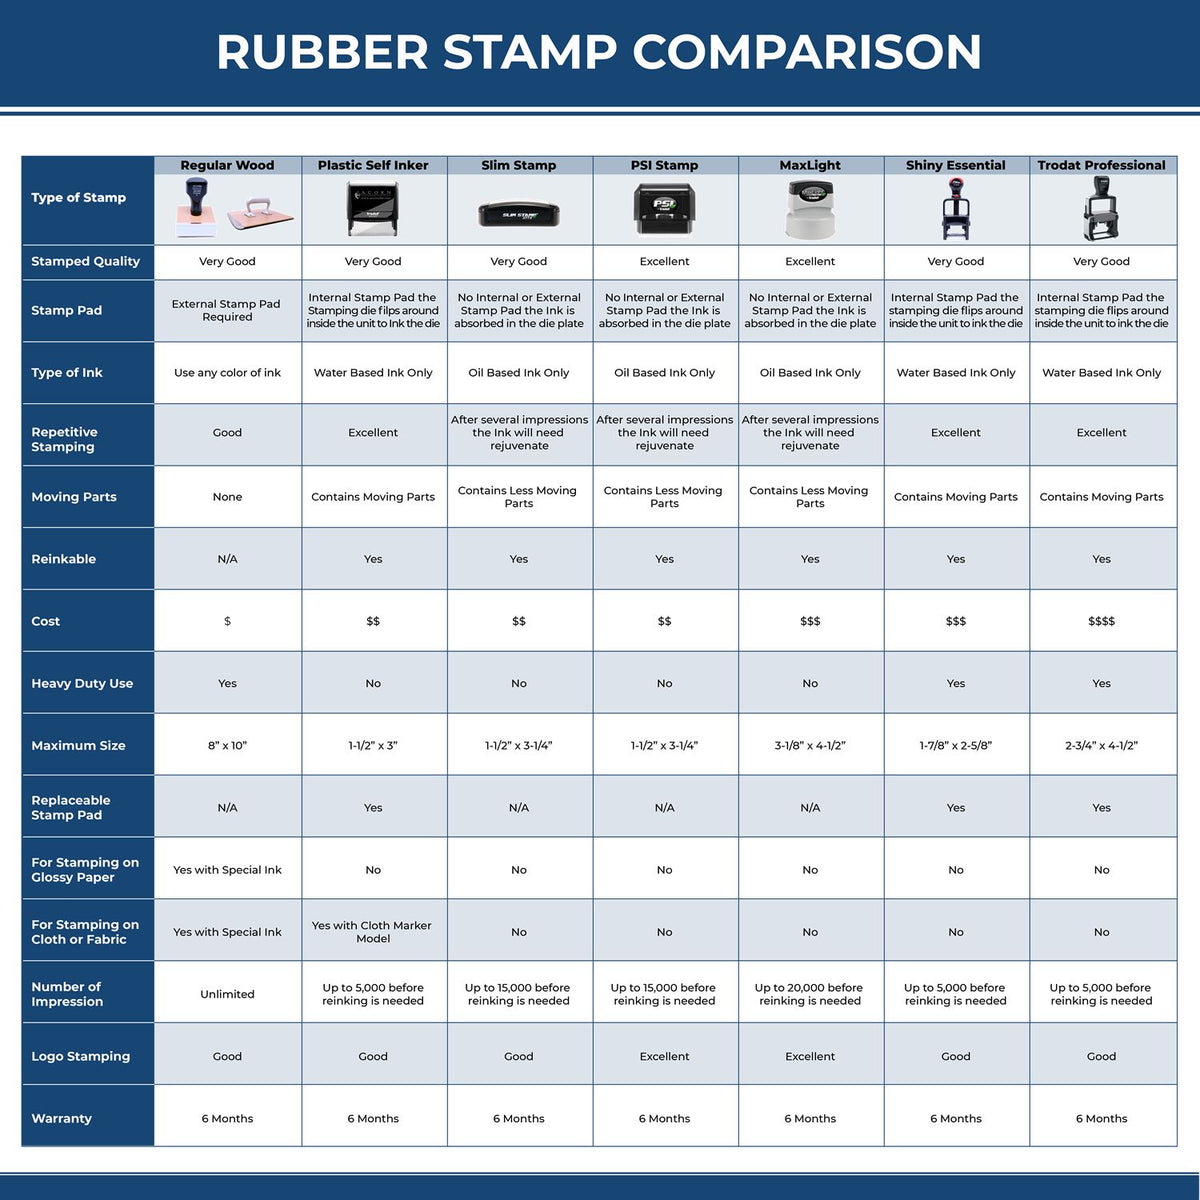 A comparison chart for the different types of mount models available for the PSI Puerto Rico Notary Stamp.